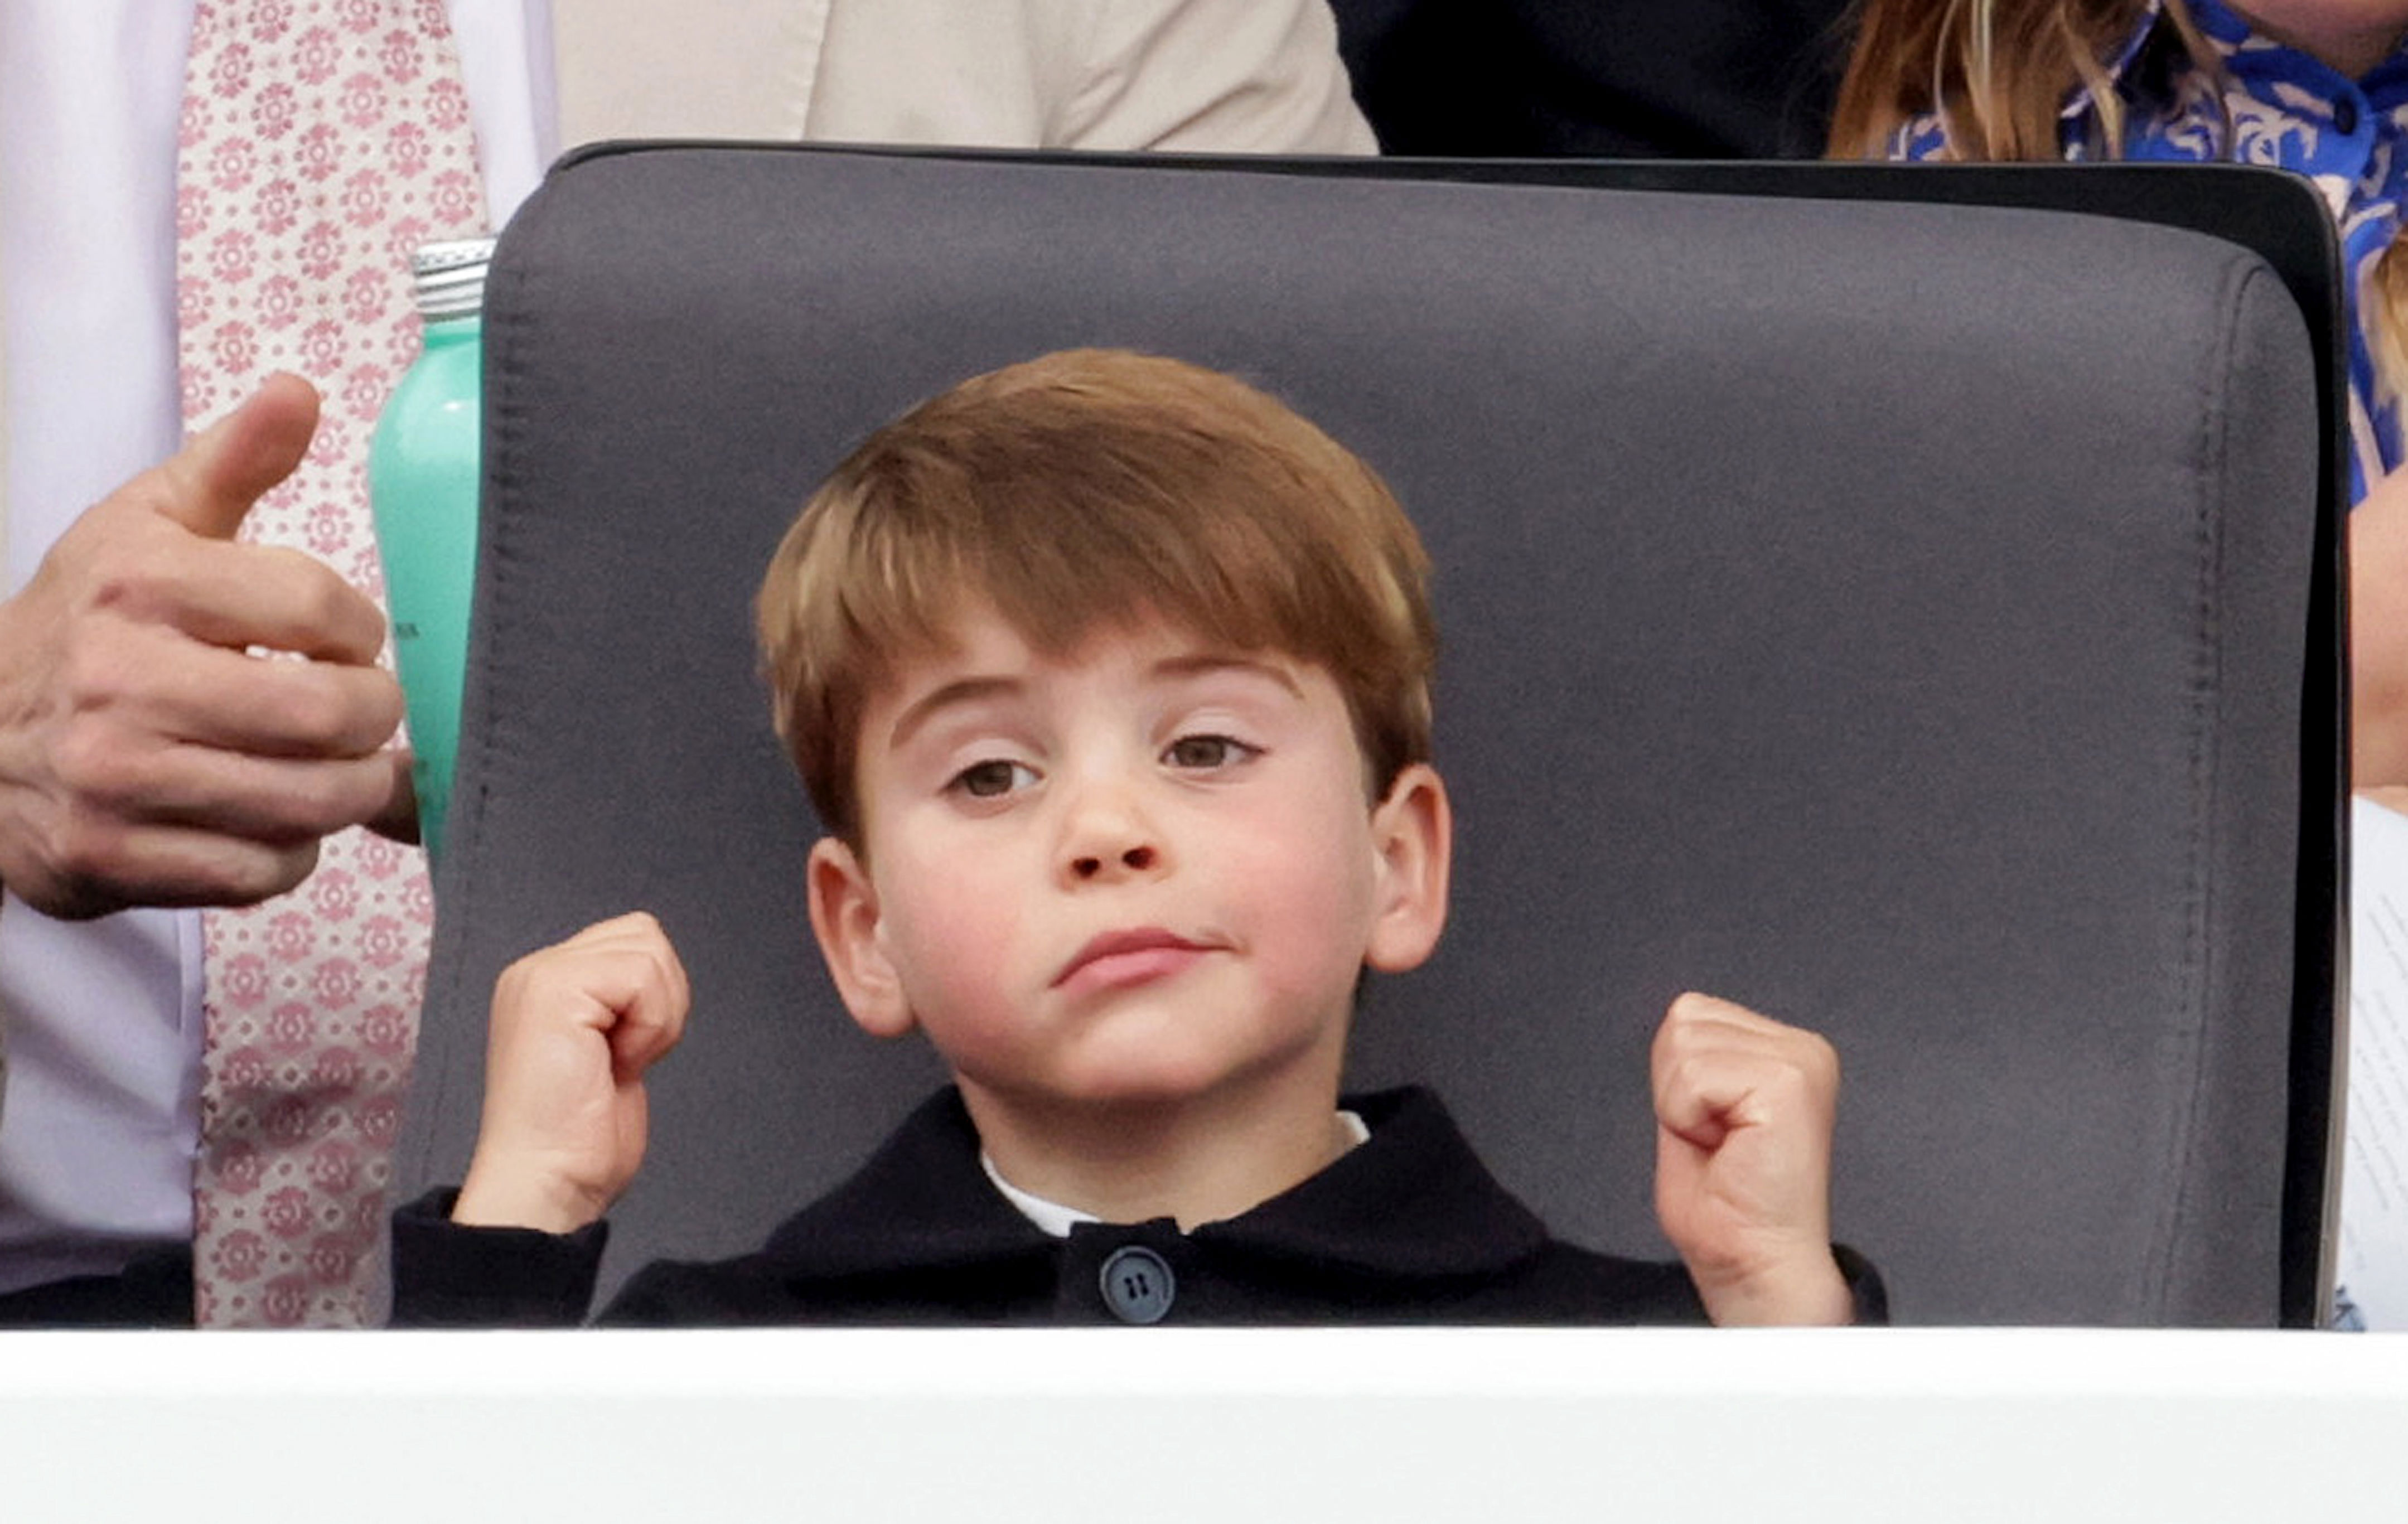 <p>Prince Louis pulled a face while watching the Platinum Jubilee Pageant in London, the final event celebrating Queen Elizabeth II's <a href="https://www.wonderwall.com/celebrity/royals/platinum-jubilee-see-the-best-photos-from-4-days-of-celebrations-marking-the-queens-70-year-reign-606239.gallery">Platinum Jubilee marking 70 years on the throne</a>, on June 5, 2022. </p>